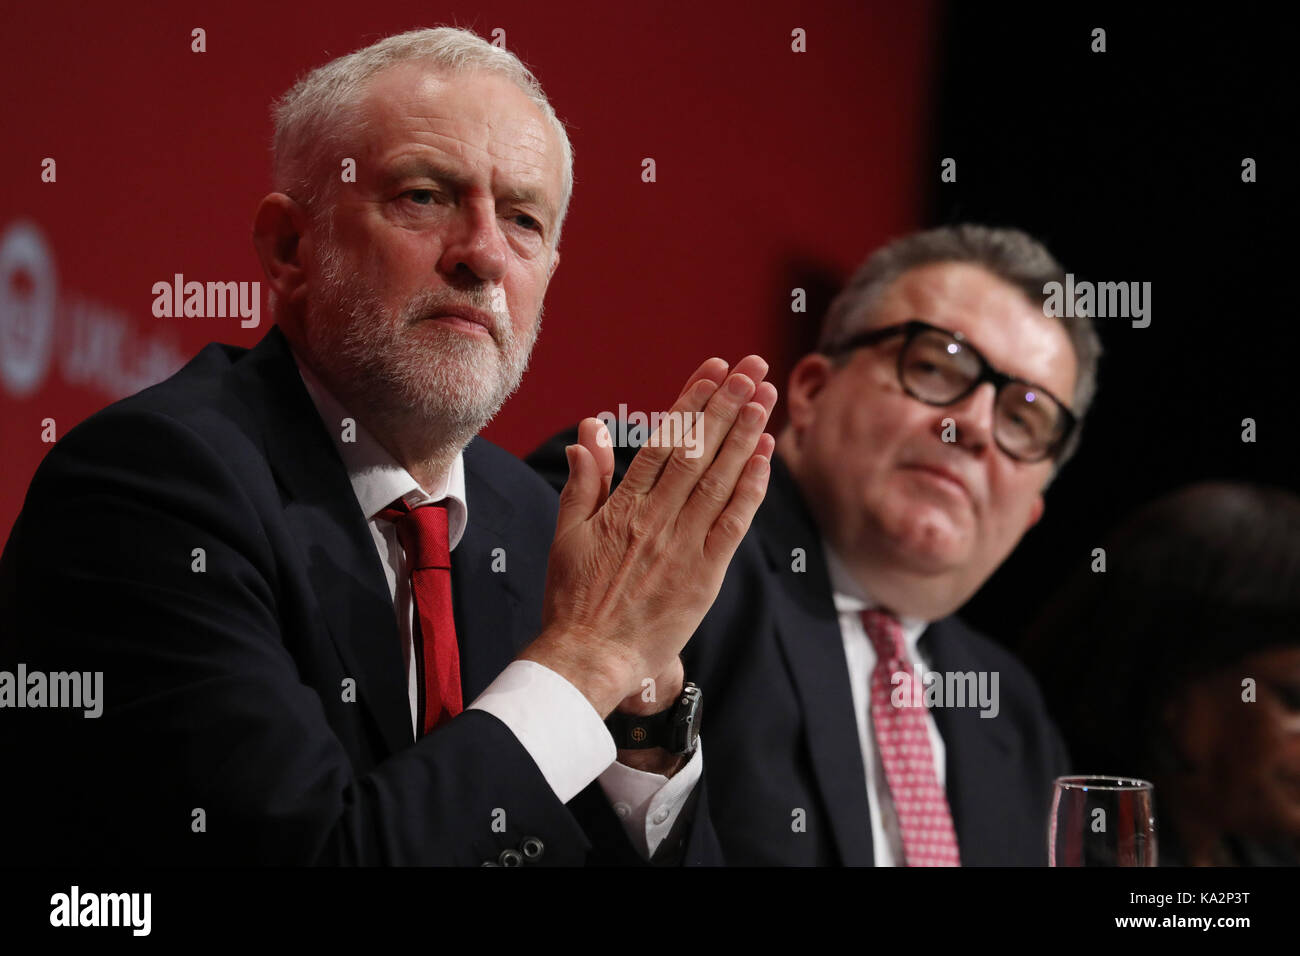 Brighton, UK. 24th September, 2017. Jeremy Corbyn (L), leader of Britain's opposition Labour party sits alongside Deputy Tom Watson during the annual Labour Party Conference in Brighton, UK Sunday, September 24, 2017. Photograph : Credit: Luke MacGregor/Alamy Live News Stock Photo